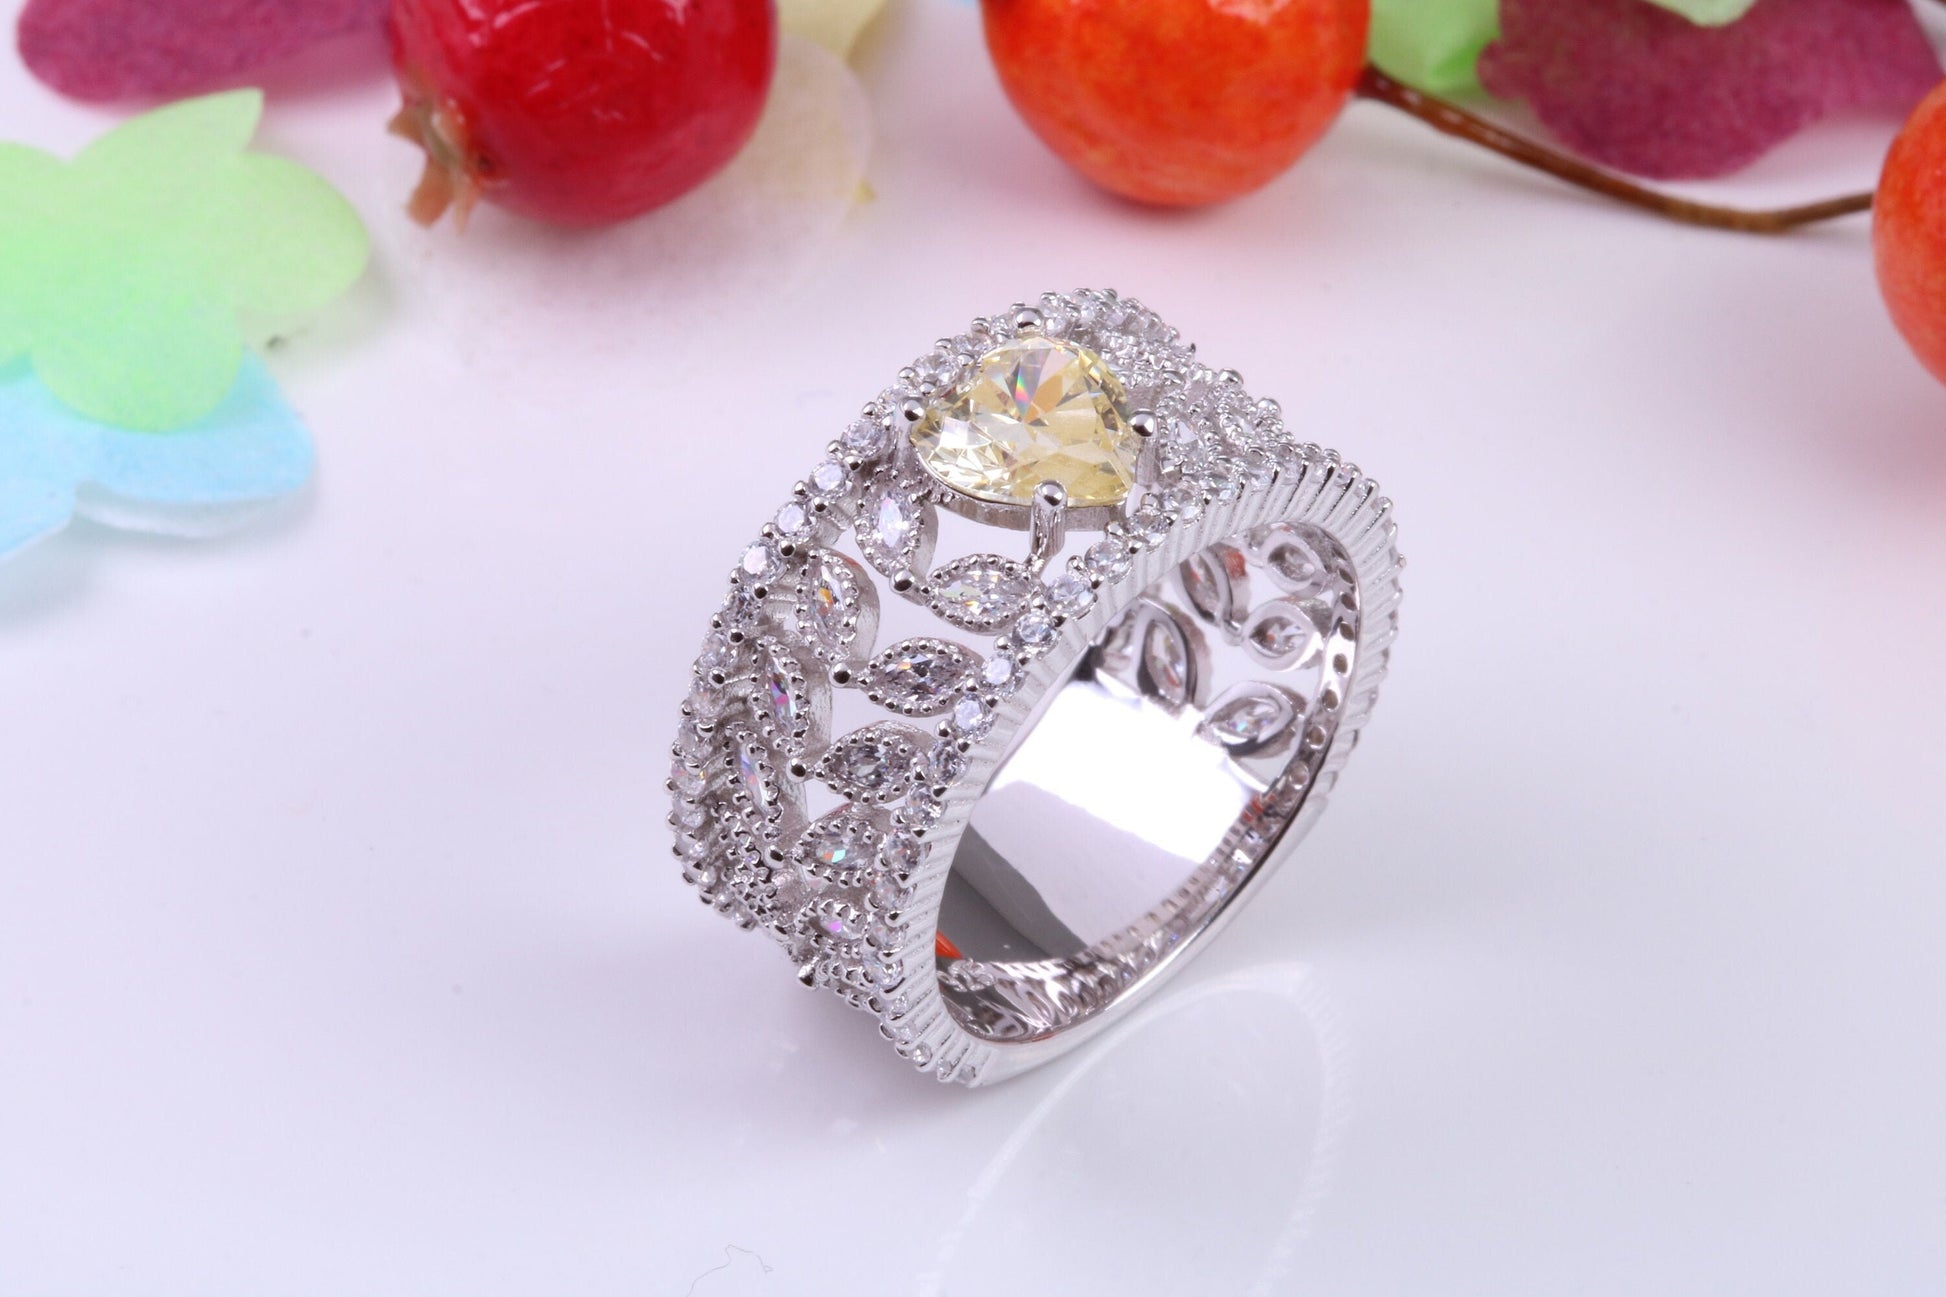 Very Dressy 10 mm wide Cubic Zirconia set Ring, Made from solid Silver